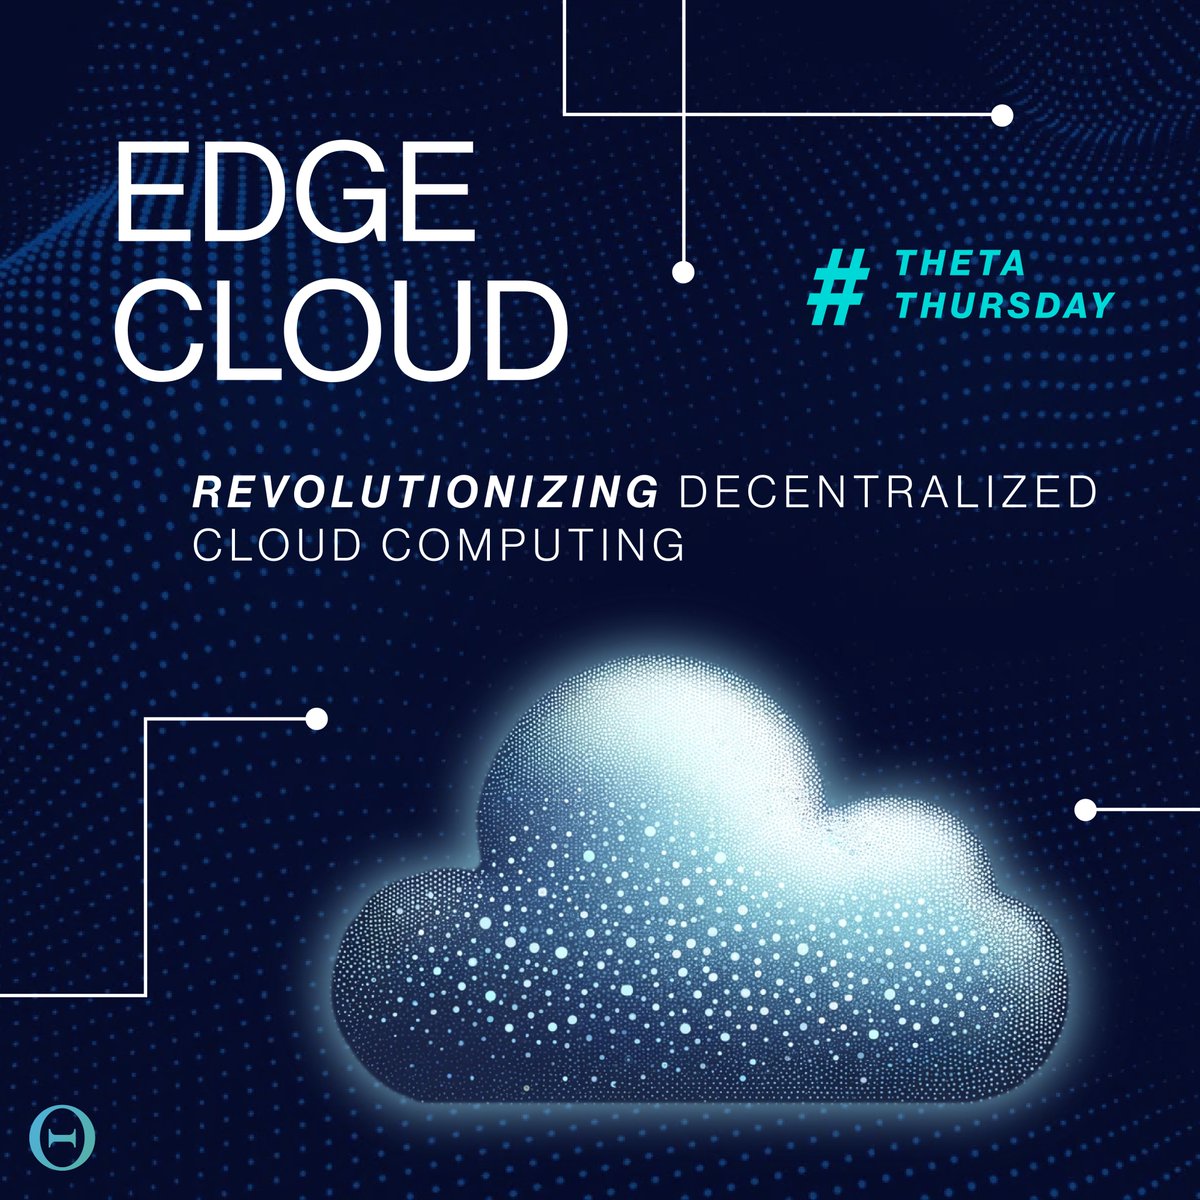 🌐 Theta EdgeCloud: Merging Google & Amazon cloud tech with decentralized Edge Nodes! Cover all cloud computing & AI needs in one platform. #ThetaEdgeCloud #CloudIntegration #AI #DecentralizedComputing @Theta_Network